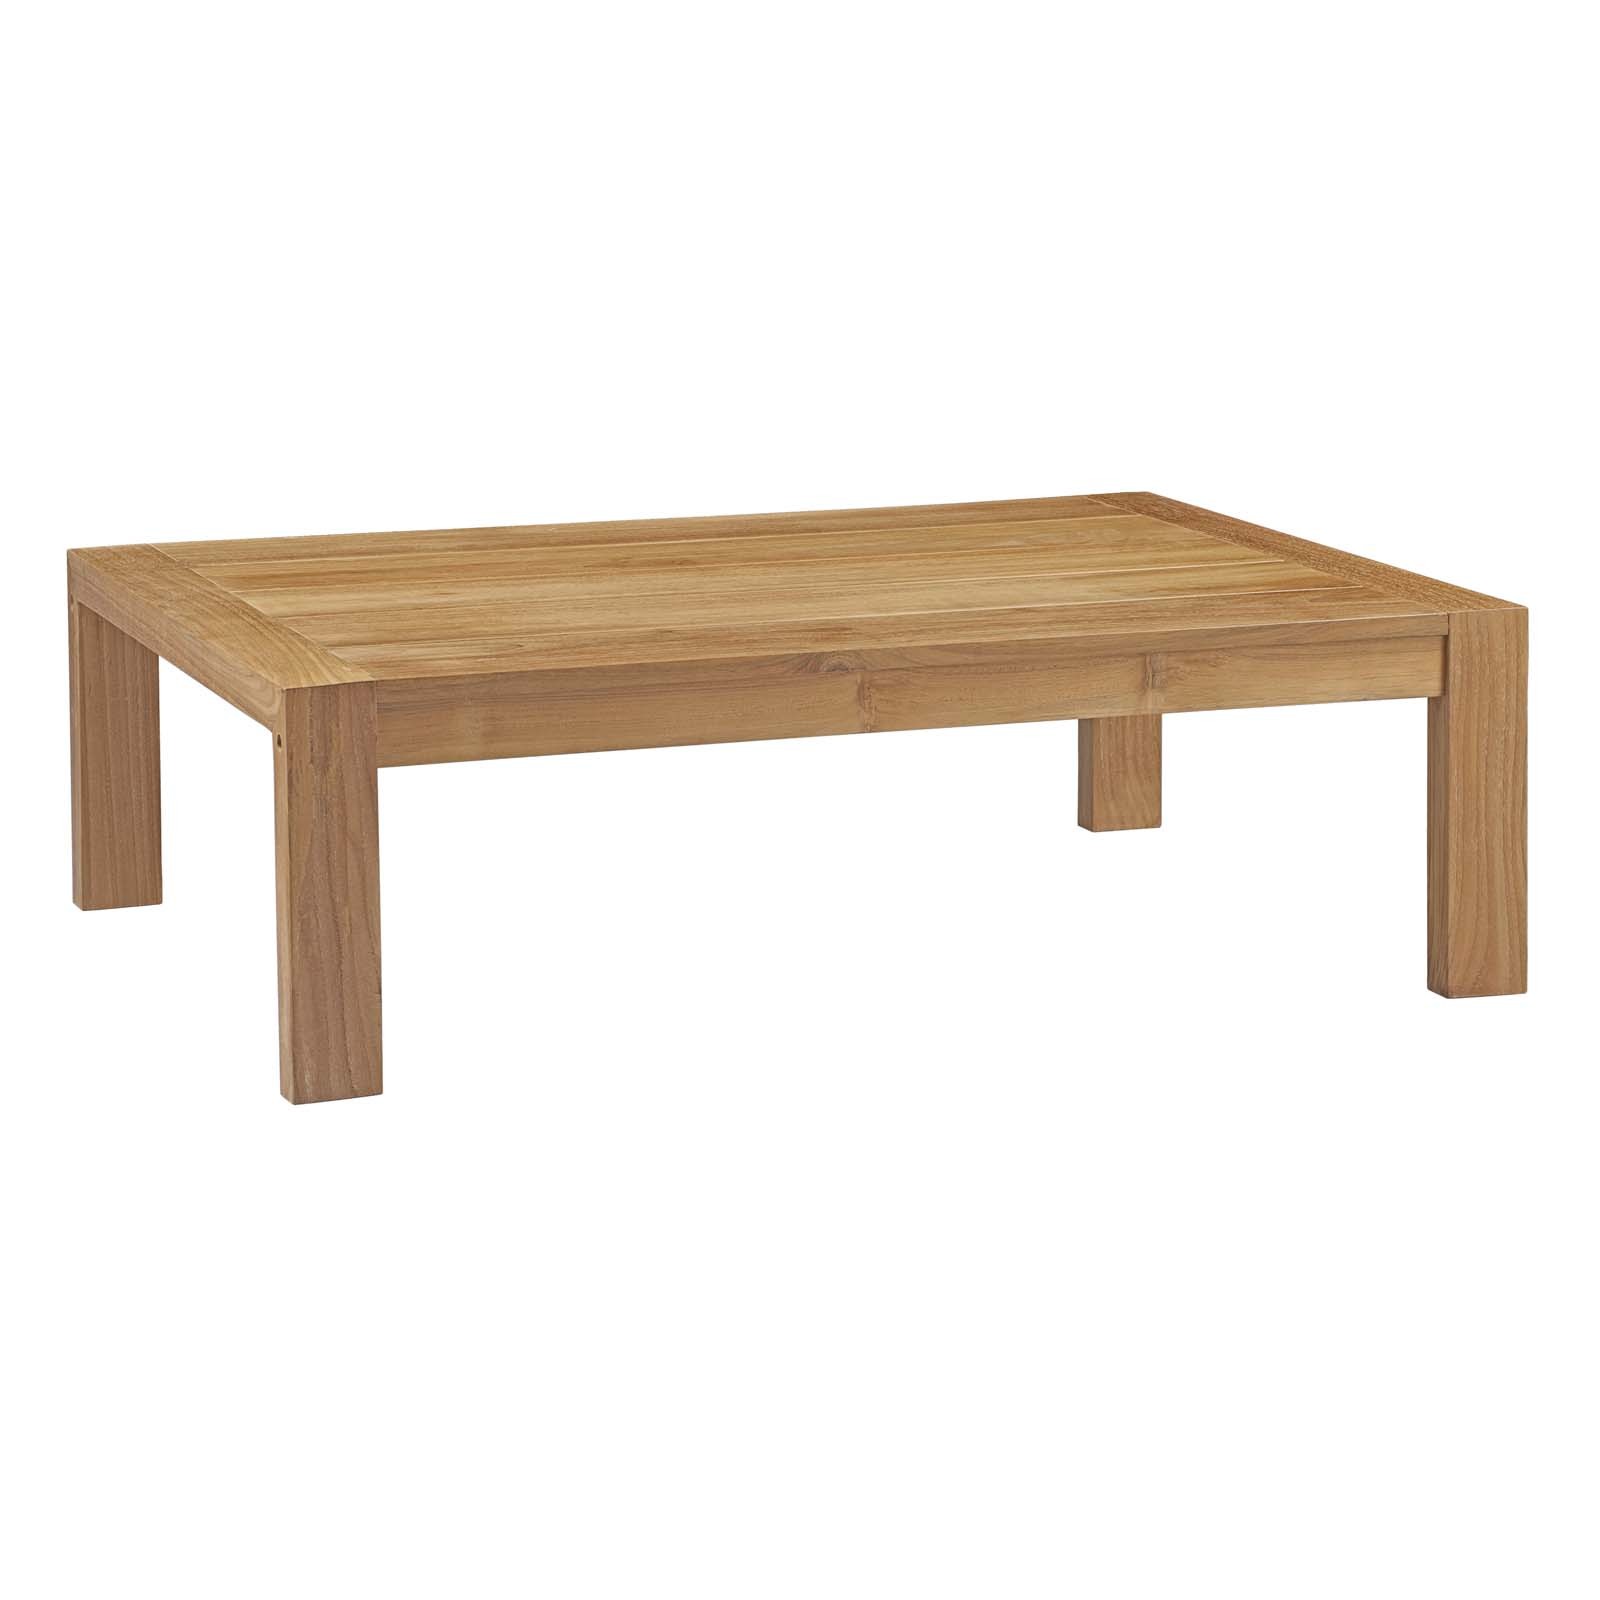 Upland Outdoor Patio Wood Coffee Table in Natural